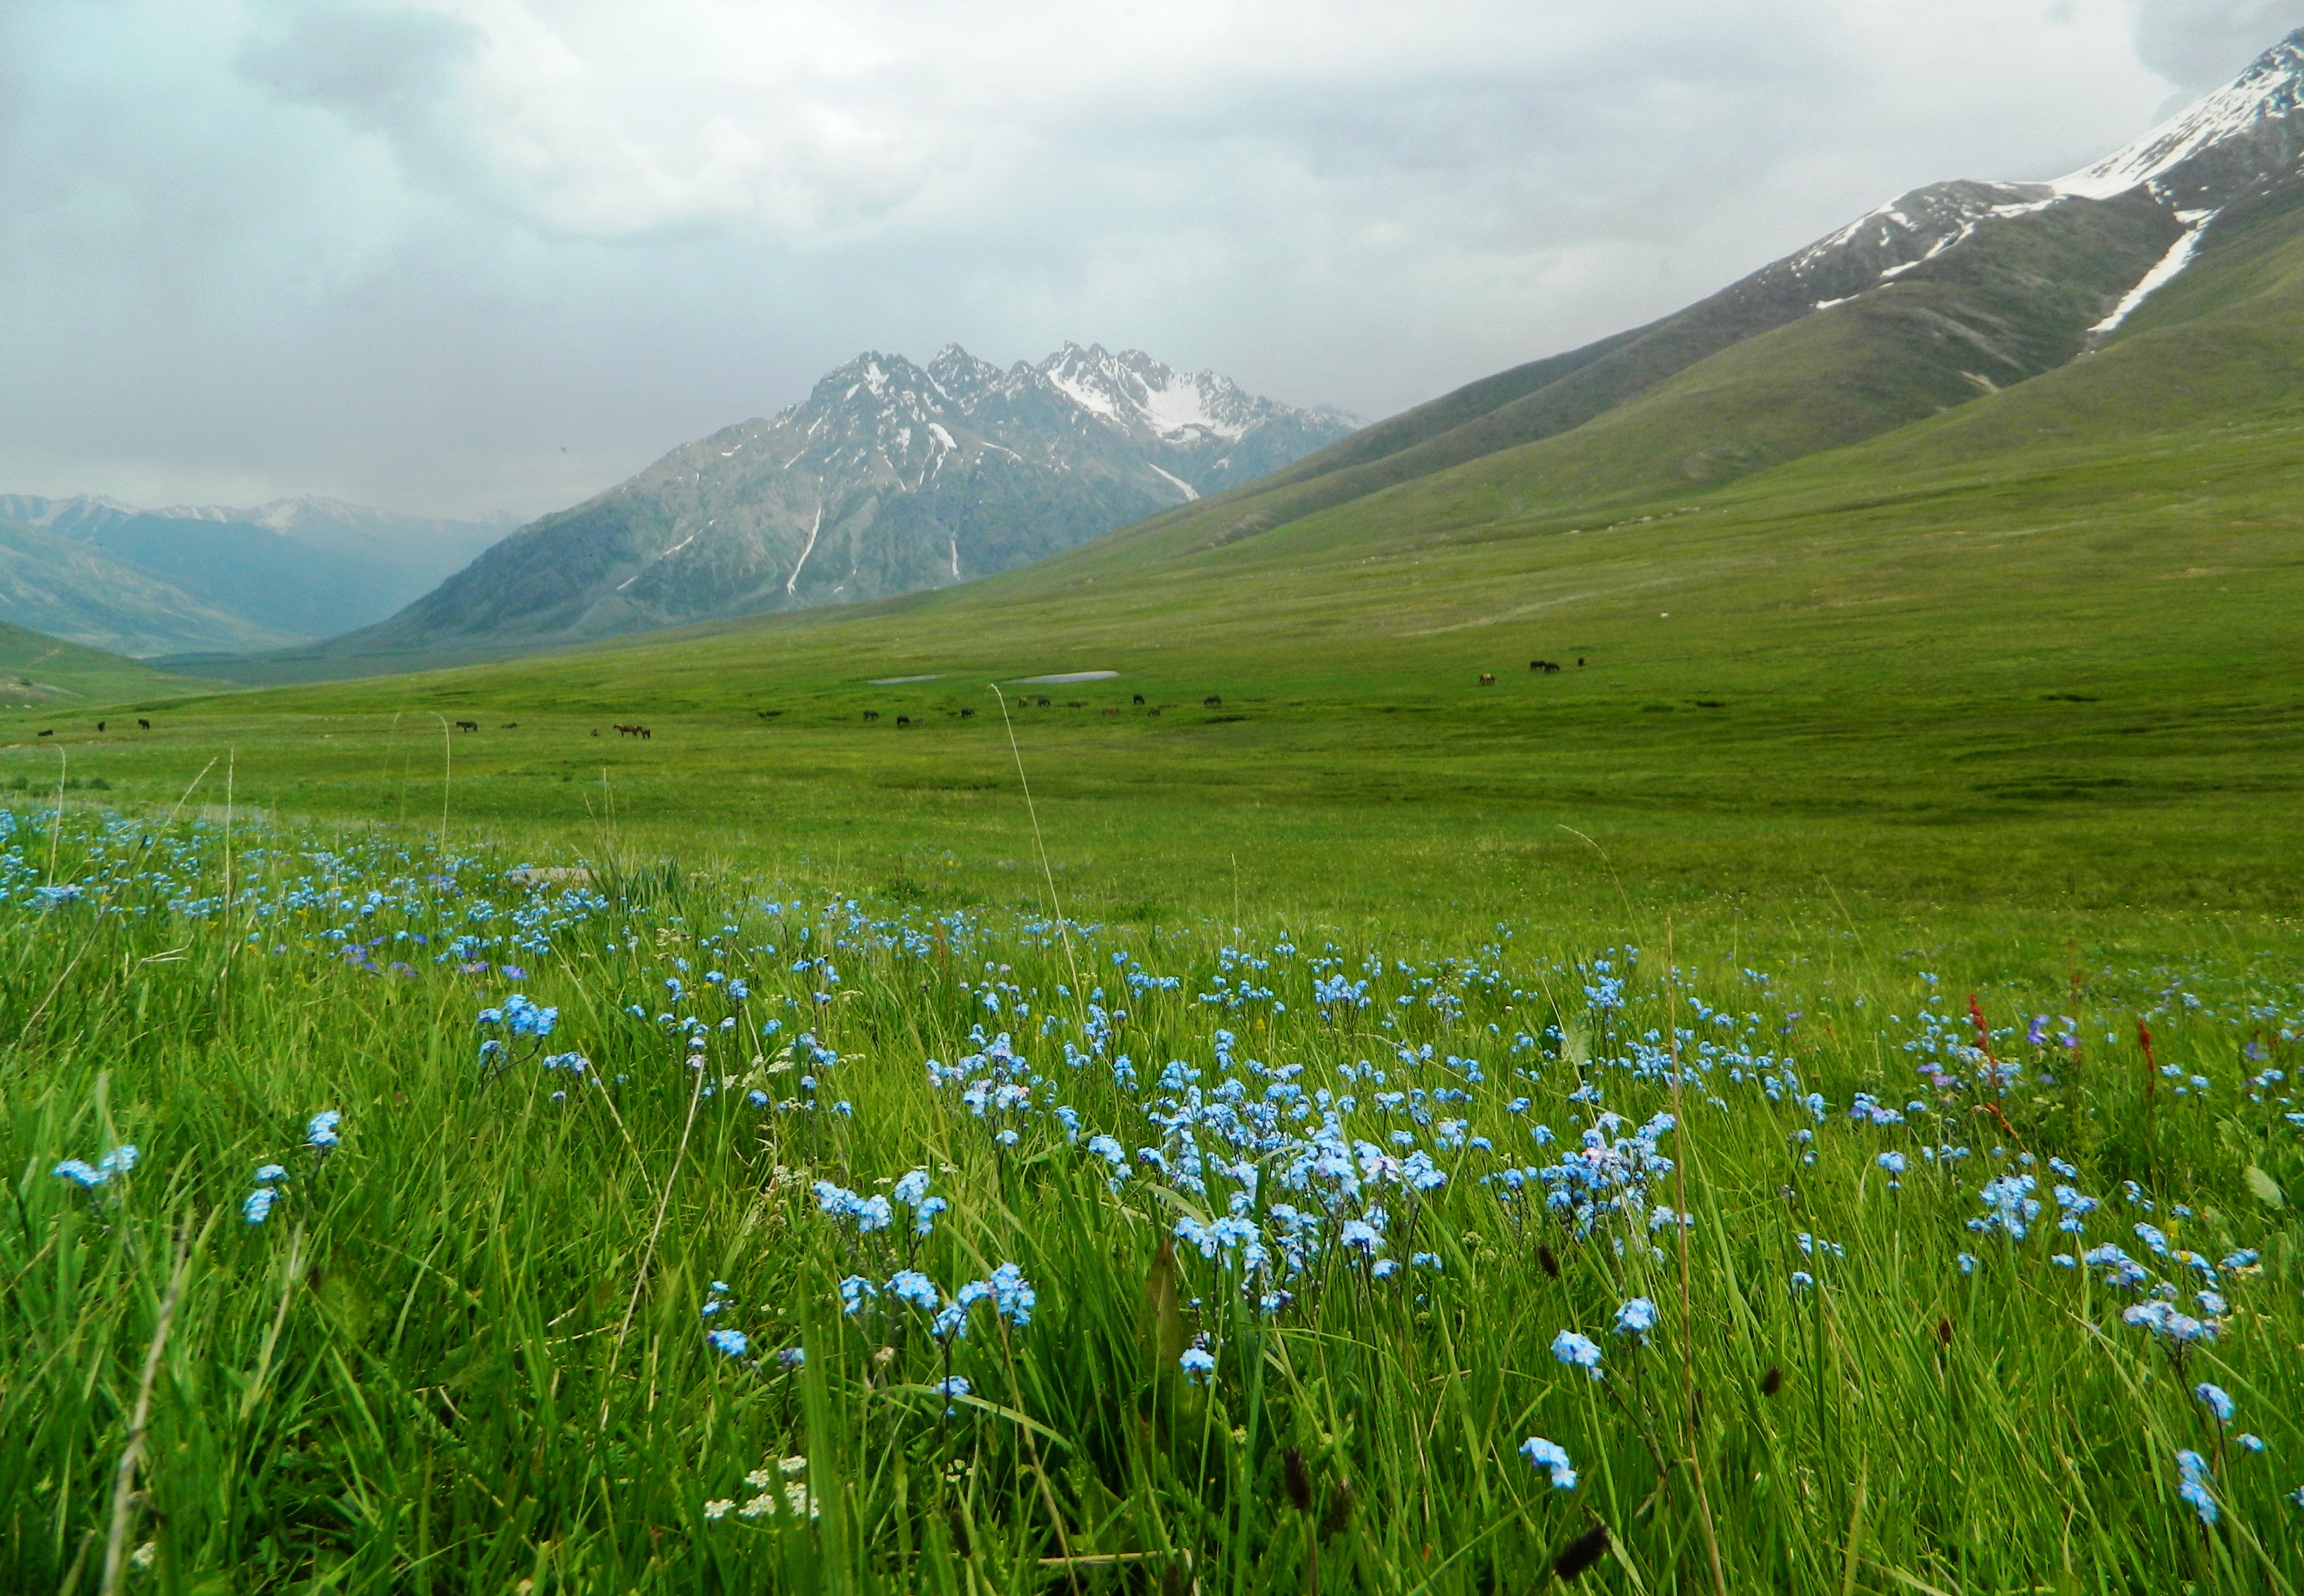 The beautiful plain filled with flowers, also known as Chota Deosai, or Small Deosai 